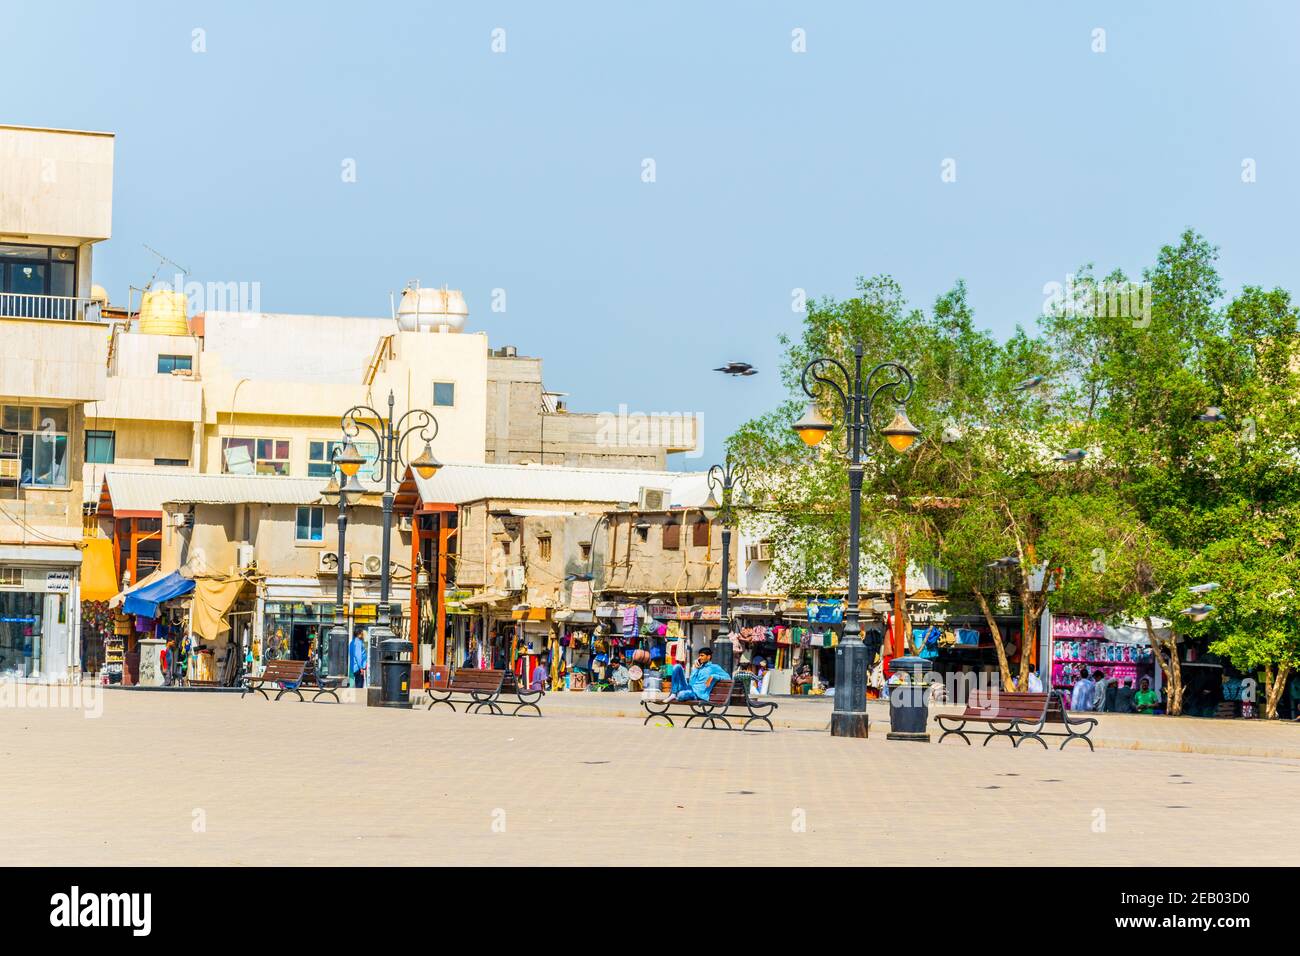 KUWAIT CITY, KUWAIT, NOVEMBER 4, 2016: View of a small square near the central souq in Kuwait. Stock Photo